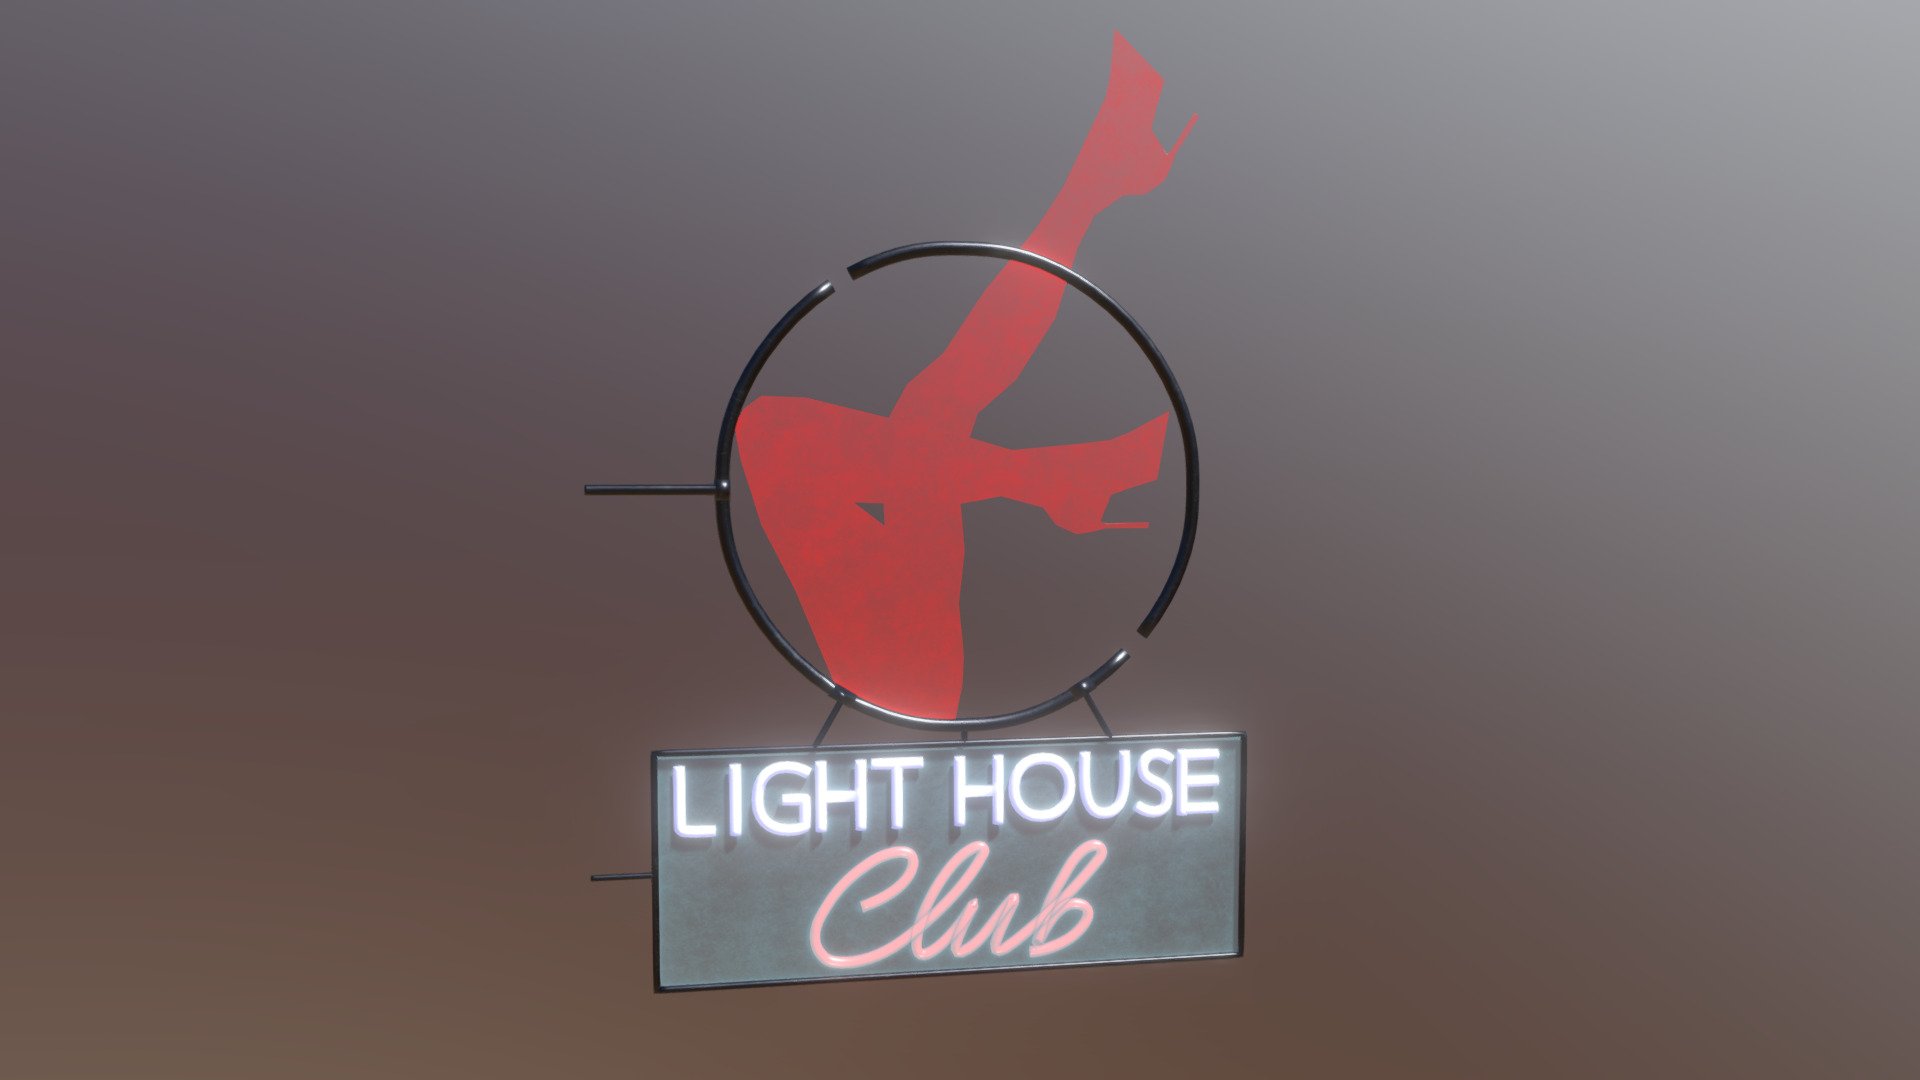 Bright sign for night club scene. Variations of this sign:
Sign on the wall http://bit.ly/2WqhdVI - Night club sign - Download Free 3D model by Mantas Stankaitis (@mansta9) 3d model